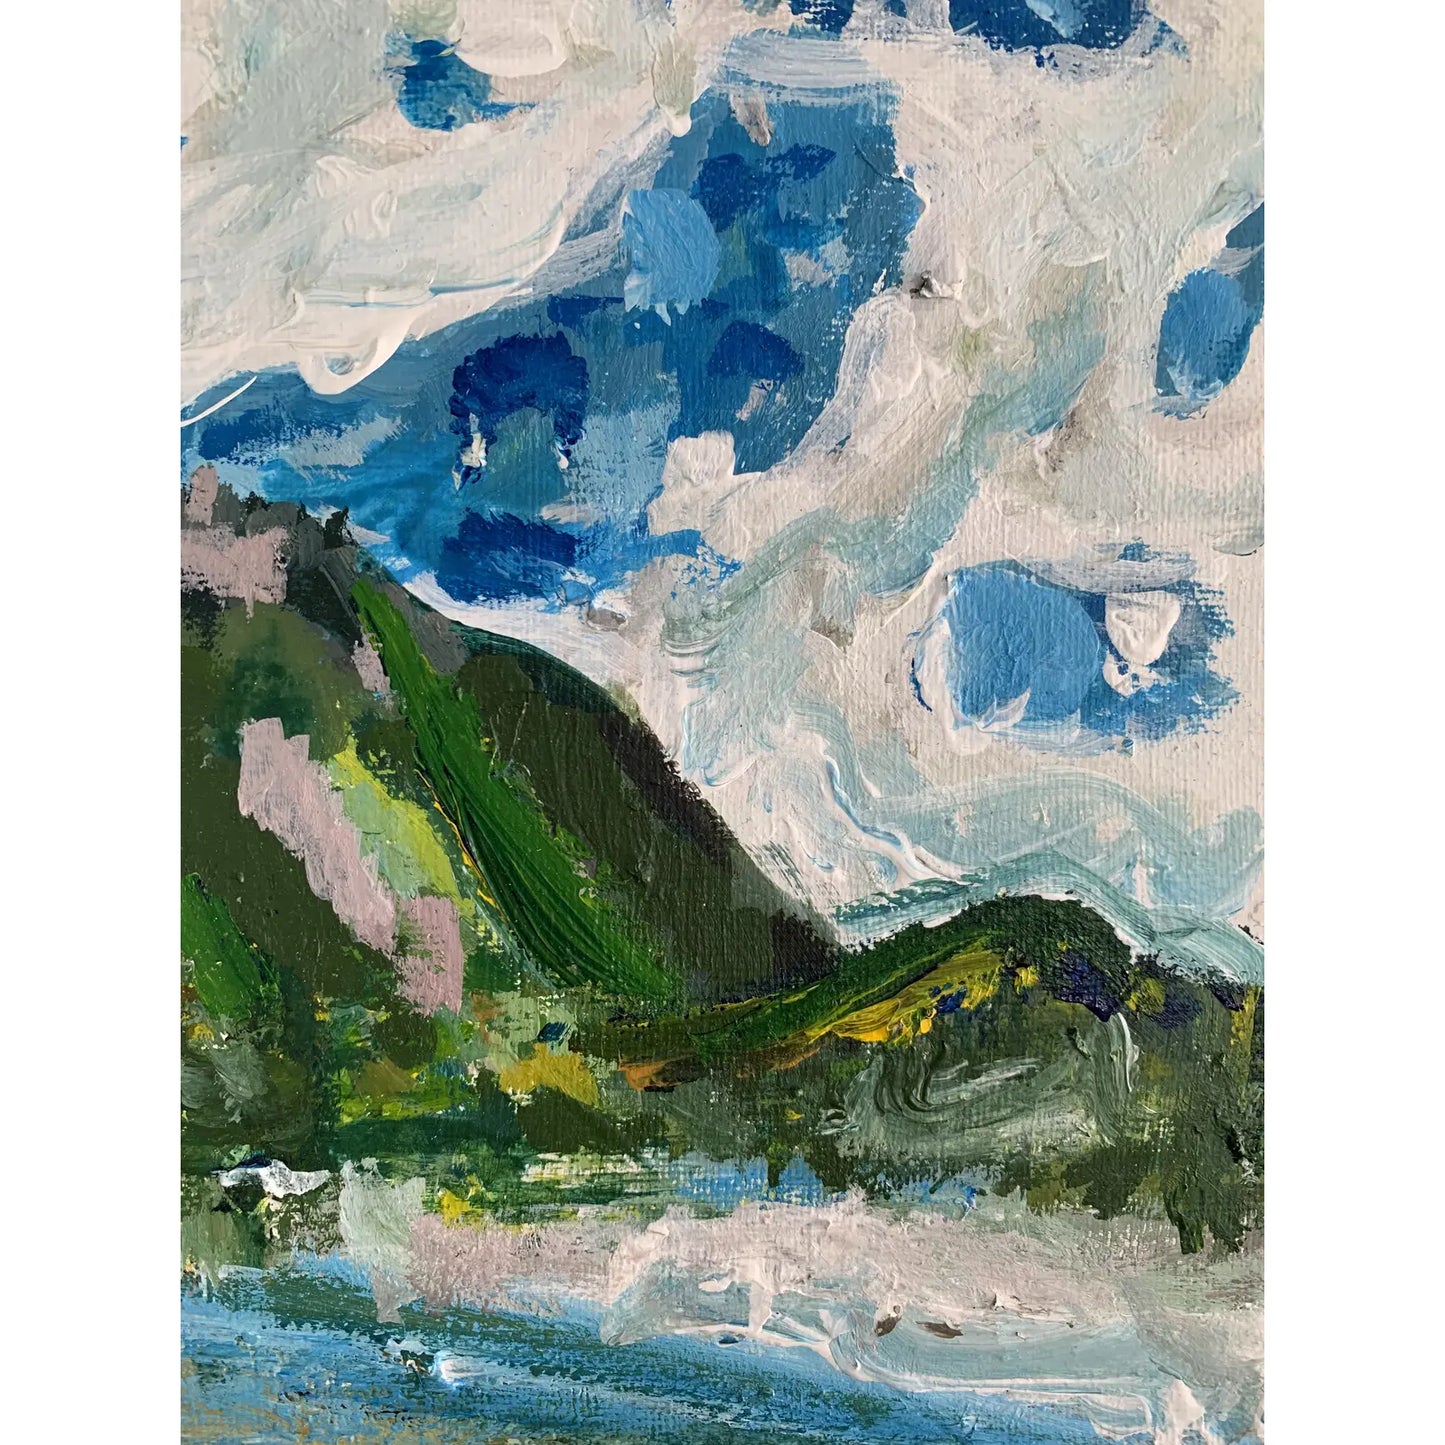 Framed Contemporary Post-Impressionist Style Landscape - Mount Si